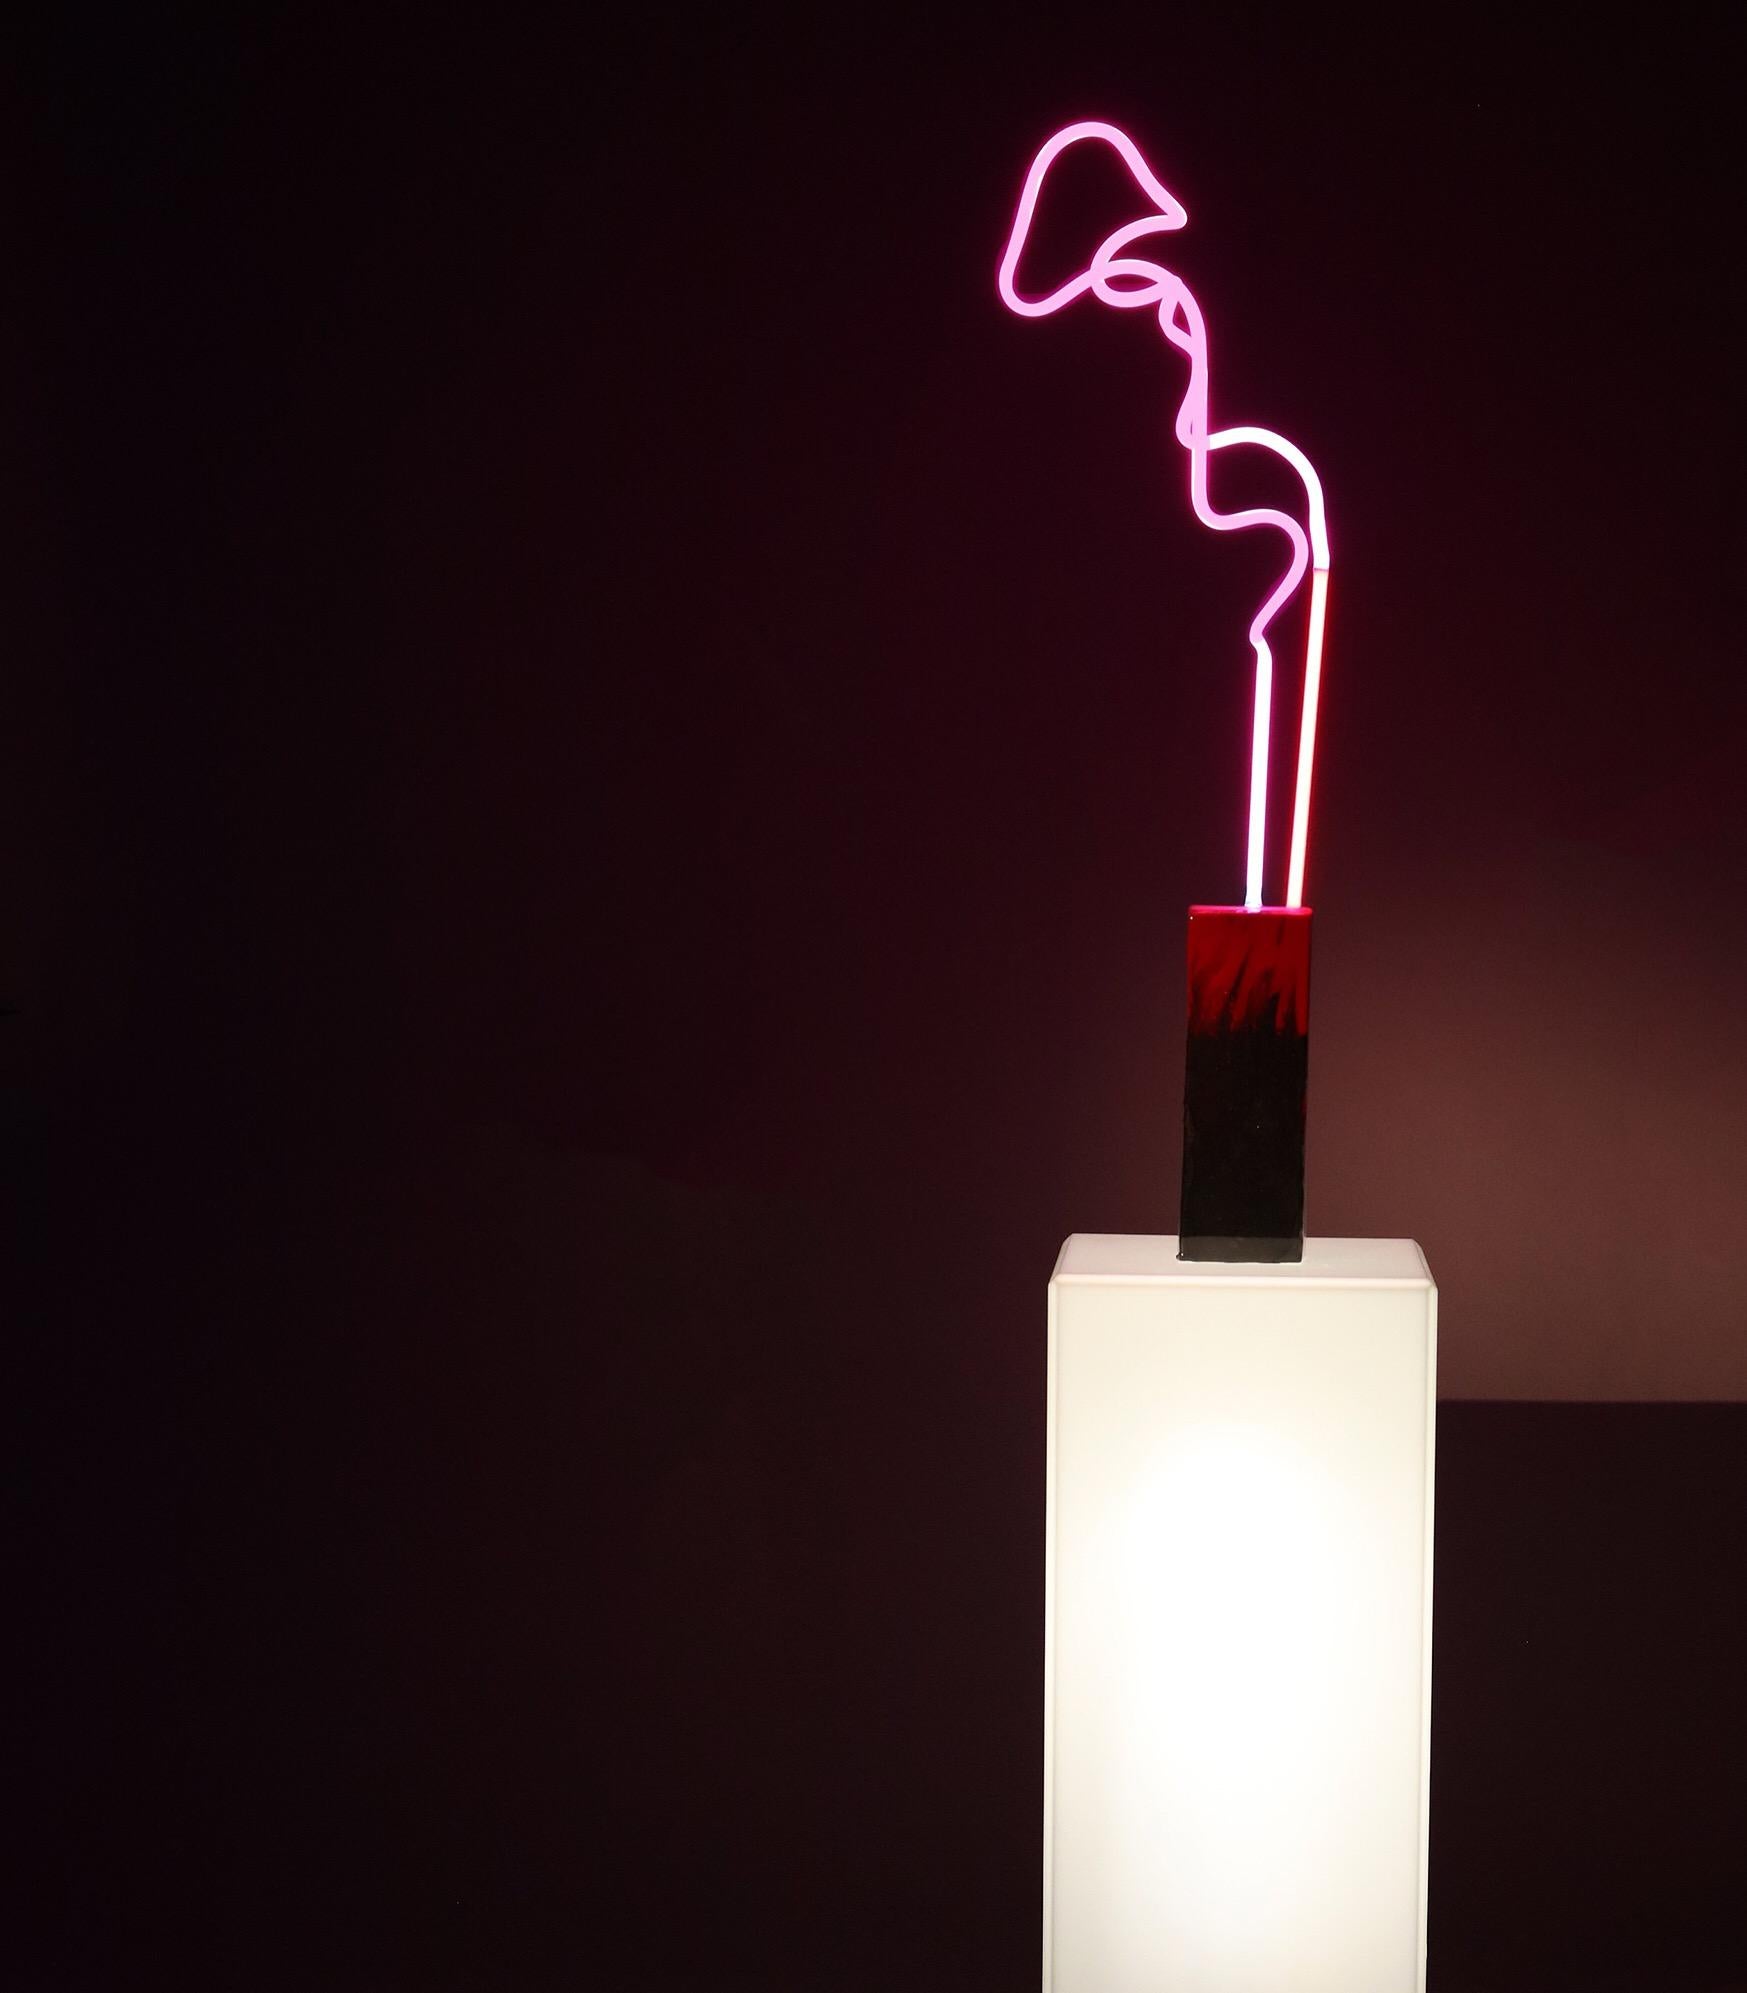 Neon lamps are free standing lights, each base is filled with pigmented resin to create a unique foundation allowing the resin to flow. Every neon lamp is filled with a different gas to achieve different levels of brightness, color and illumination